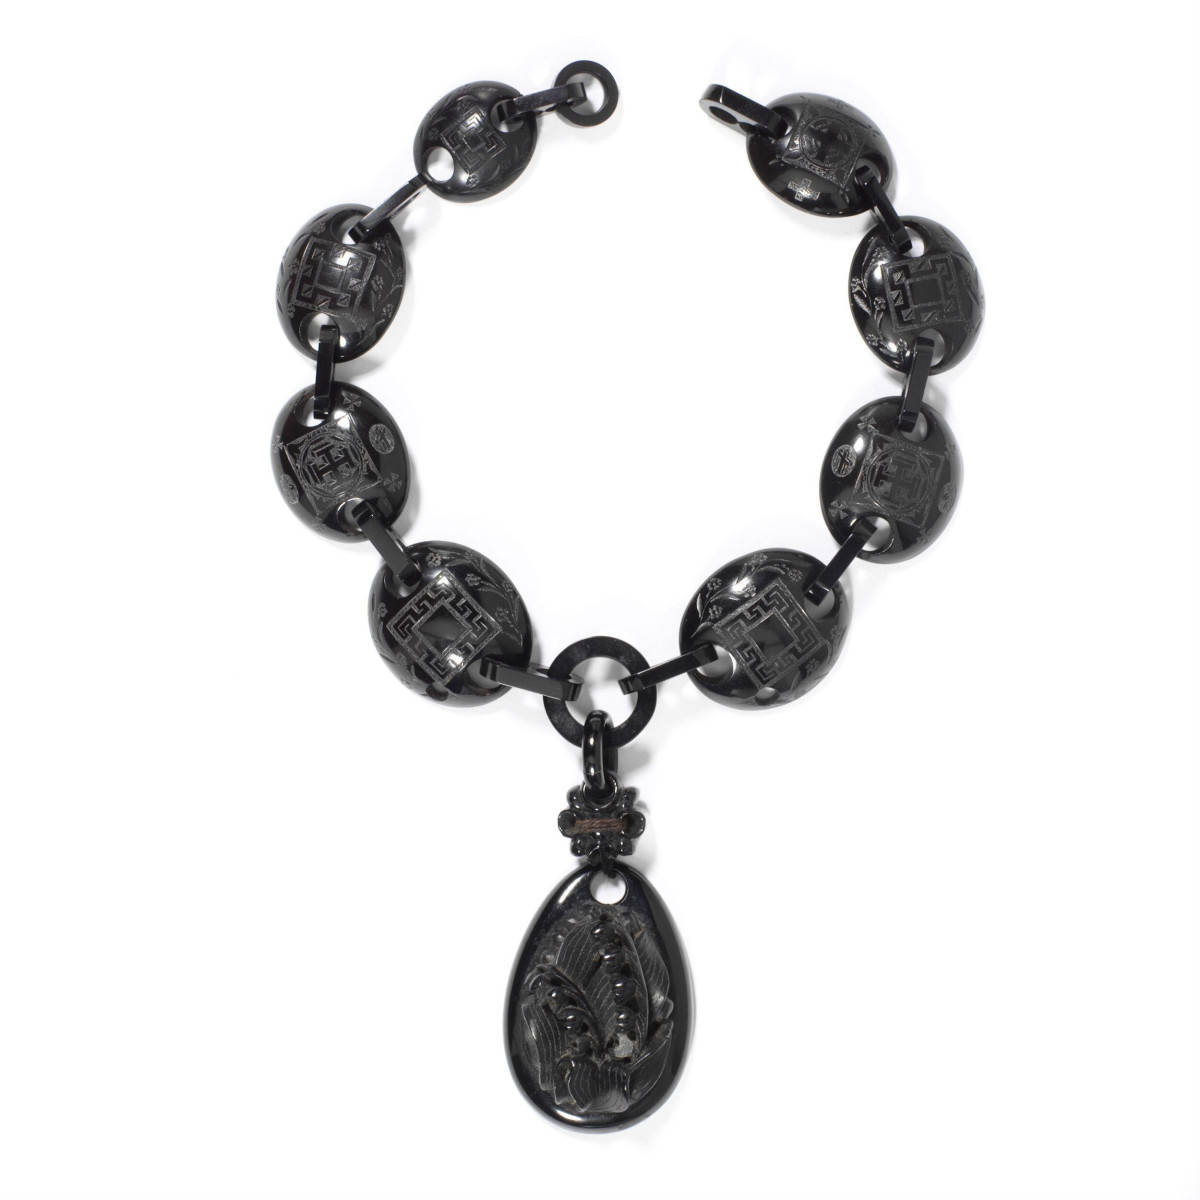 Ebony carved watch chain with french jet beads